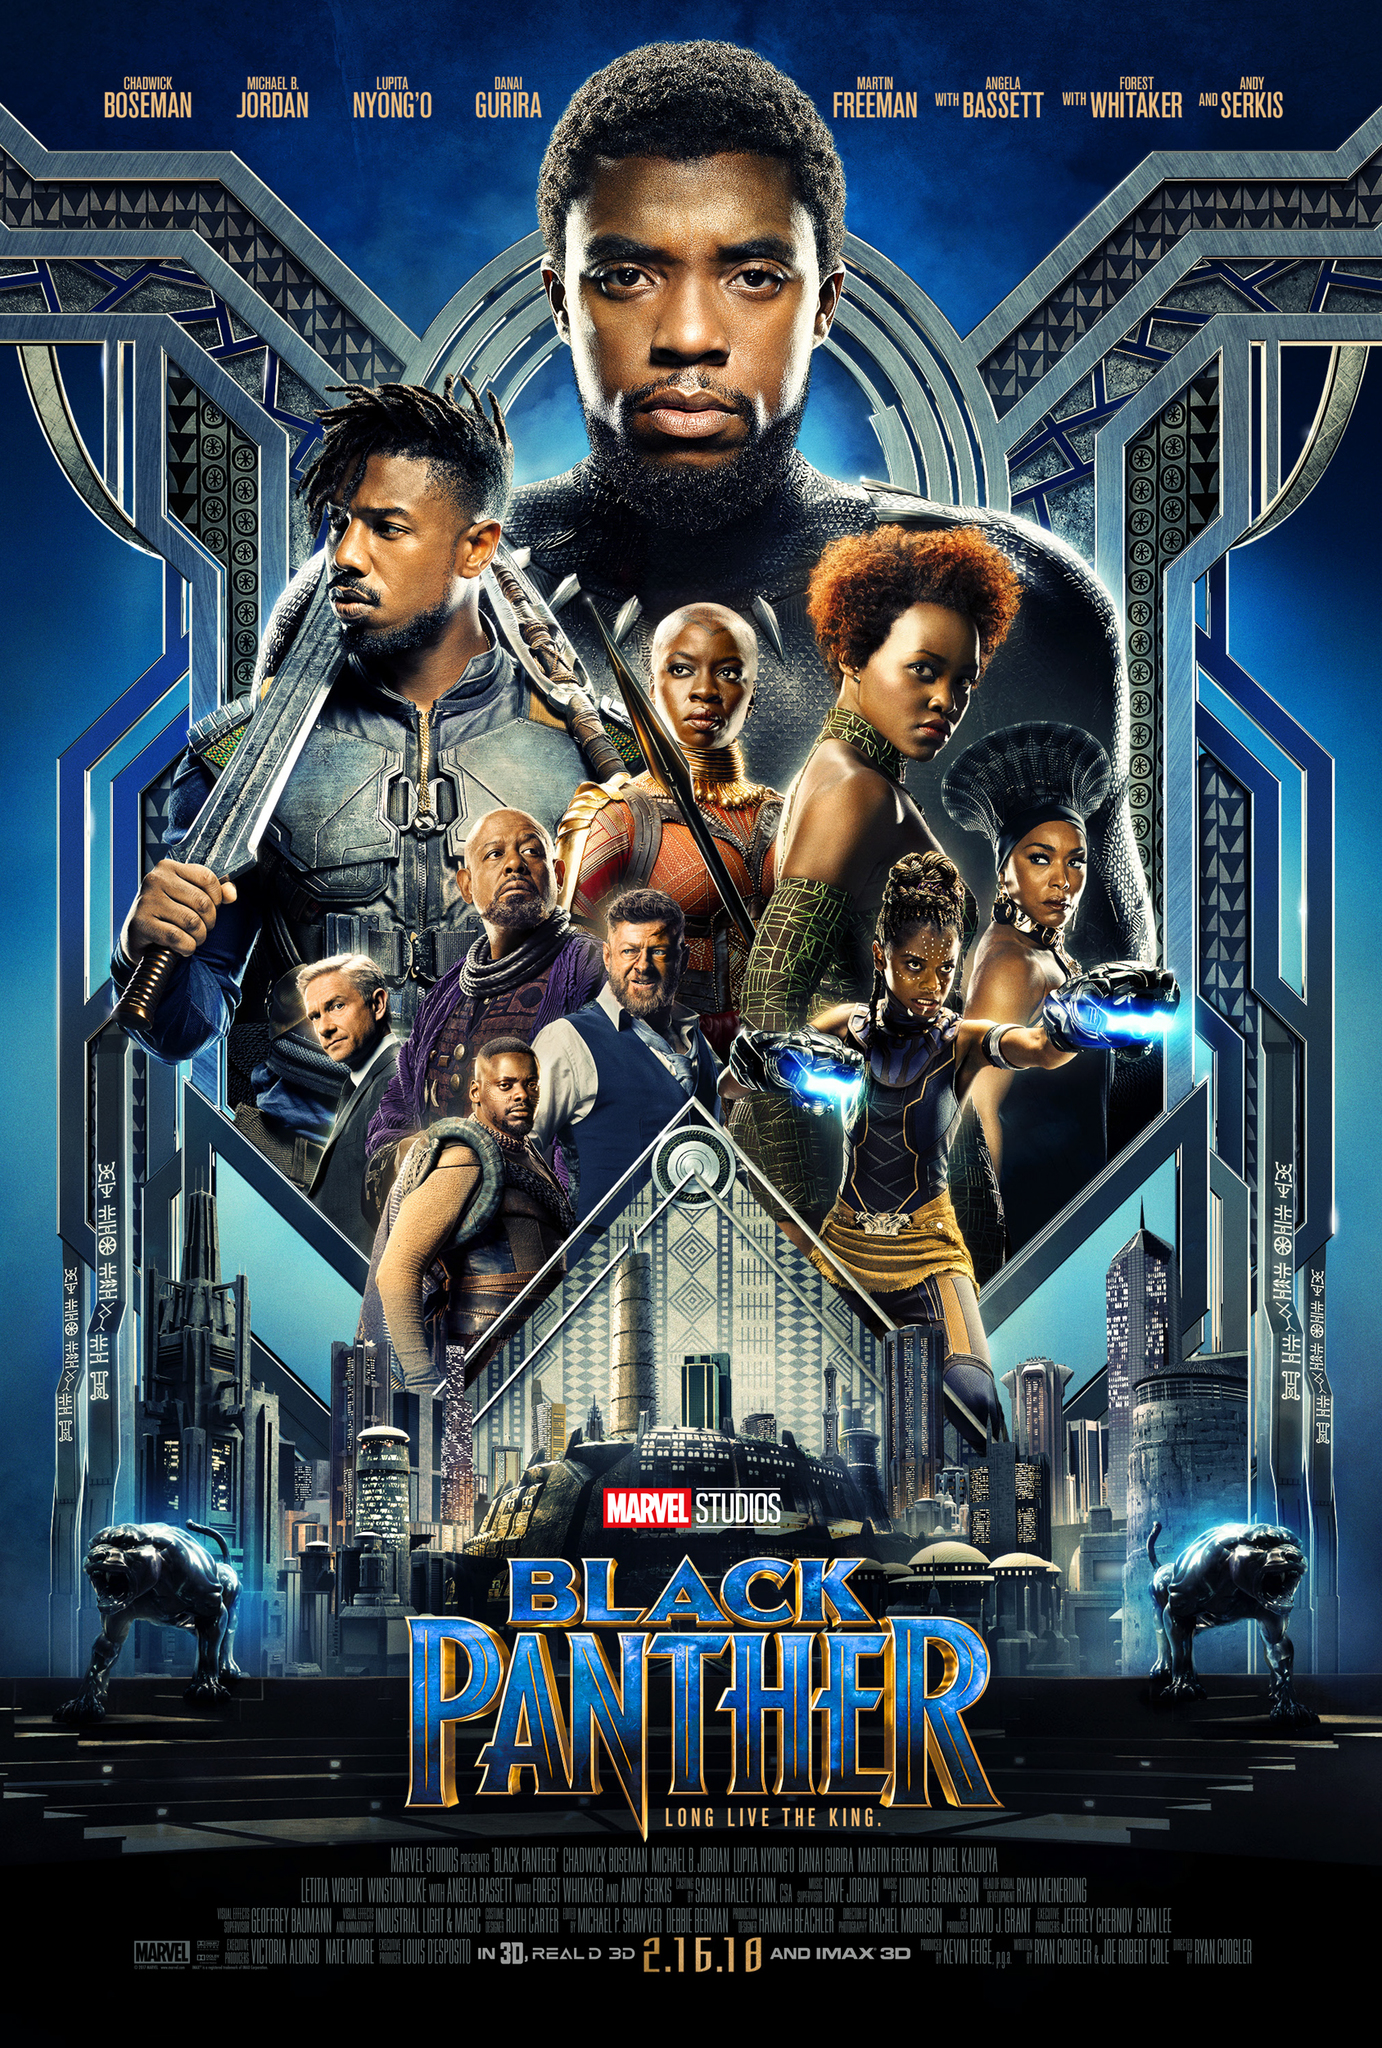 After his father's death, T'Challa returns home to Wakanda to inherit his throne. However, a powerful enemy related to his family threatens to attack his nation.